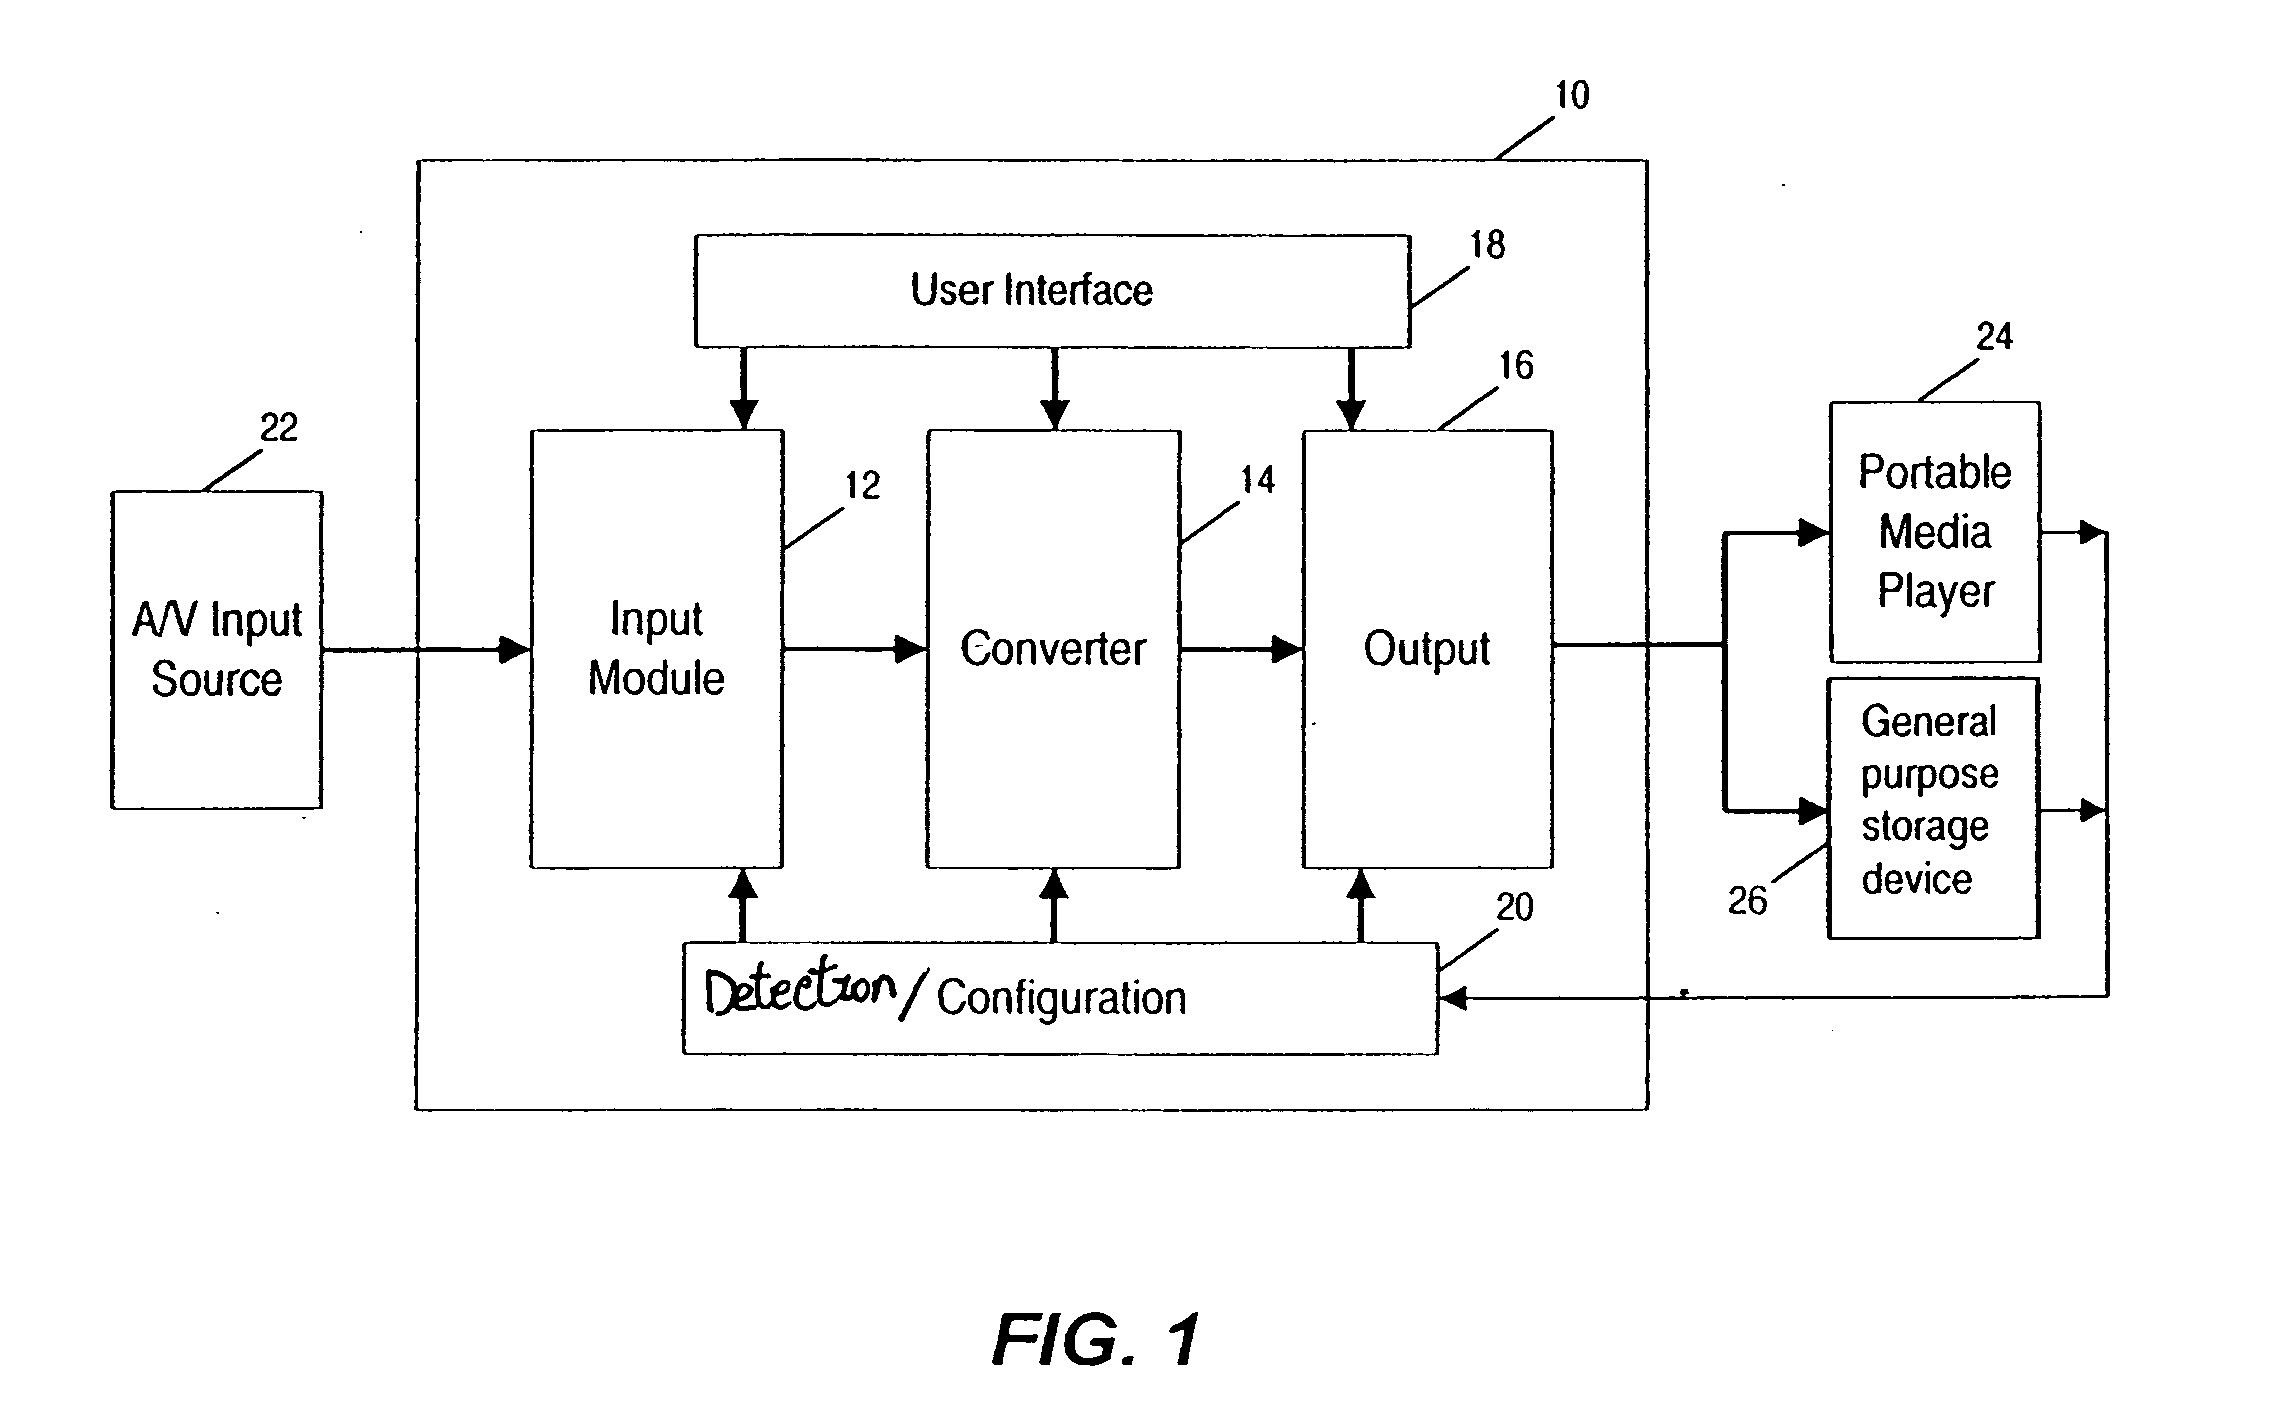 Recording apparatus for use with a range of portable media players